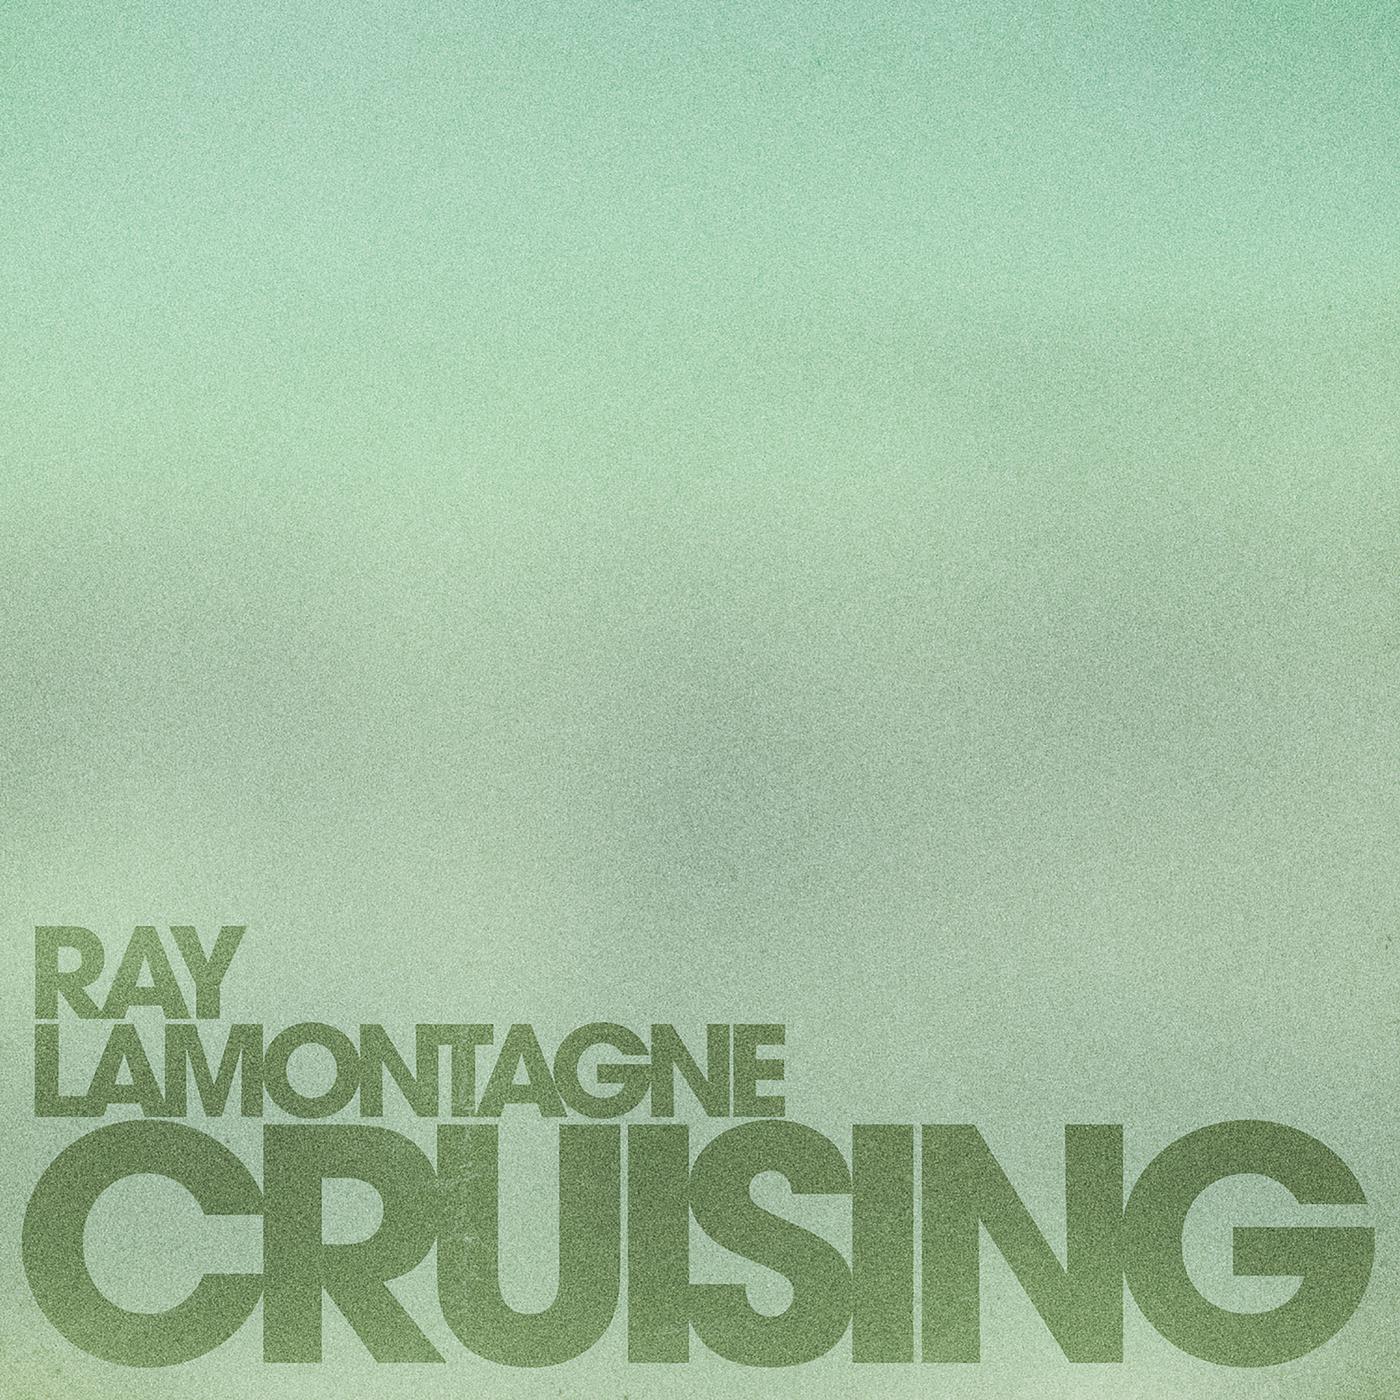 Ray LaMontagne - Part One - Hey, No Pressure